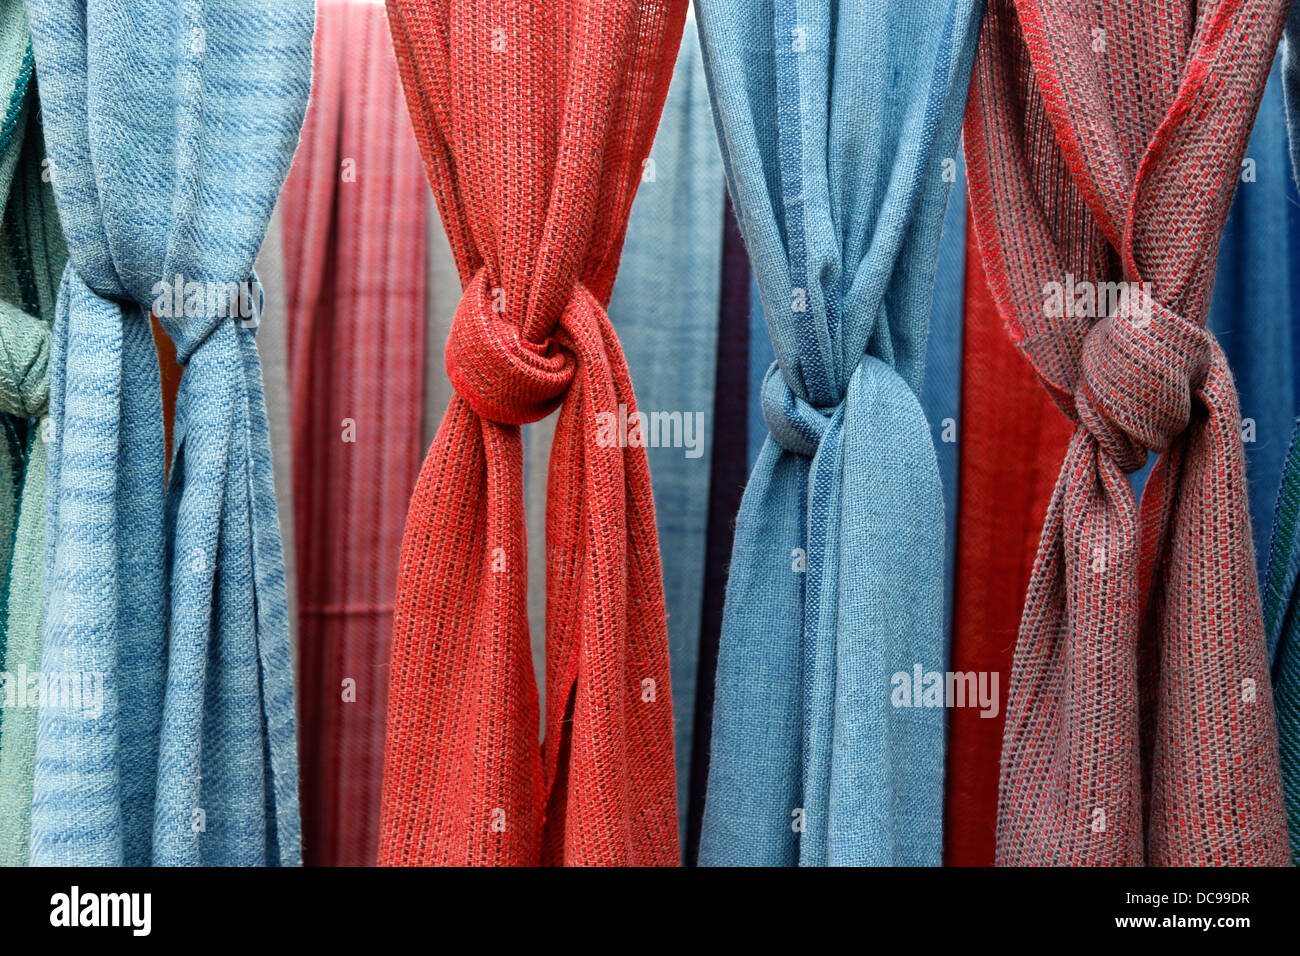 Beautifully colored scarves Stock Photo